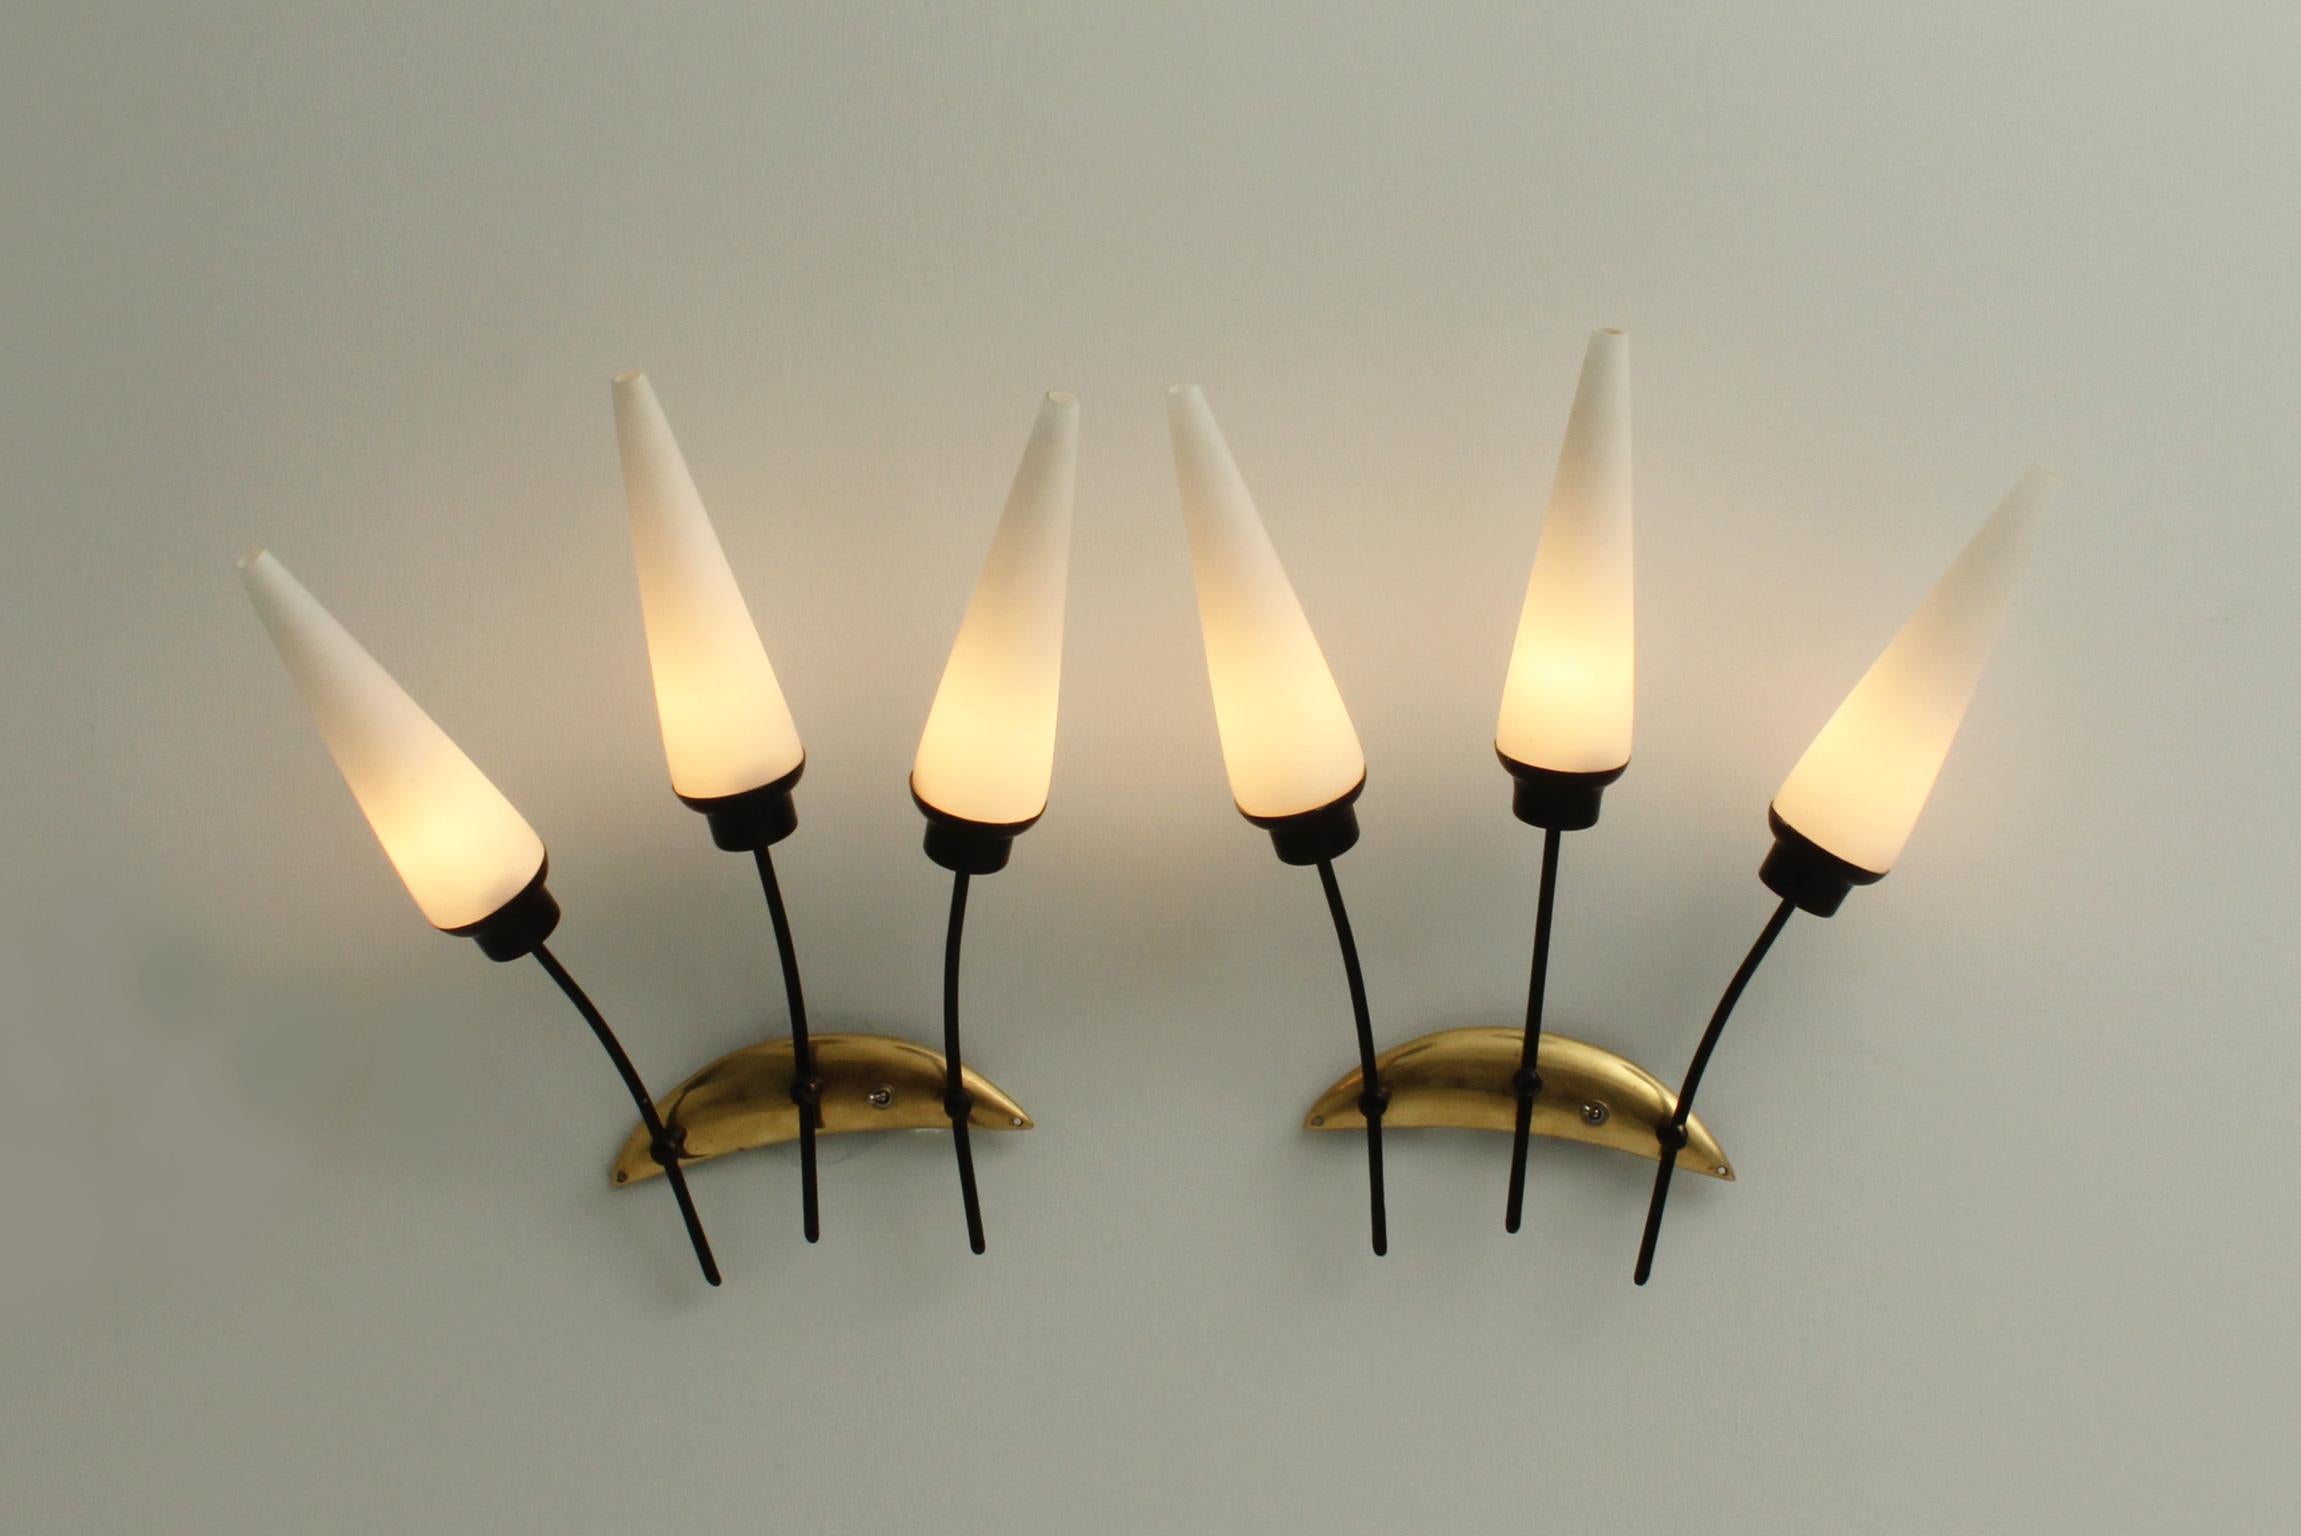 Metal Pair of French Sconces Attributed to Maison Arlus, 1950's For Sale